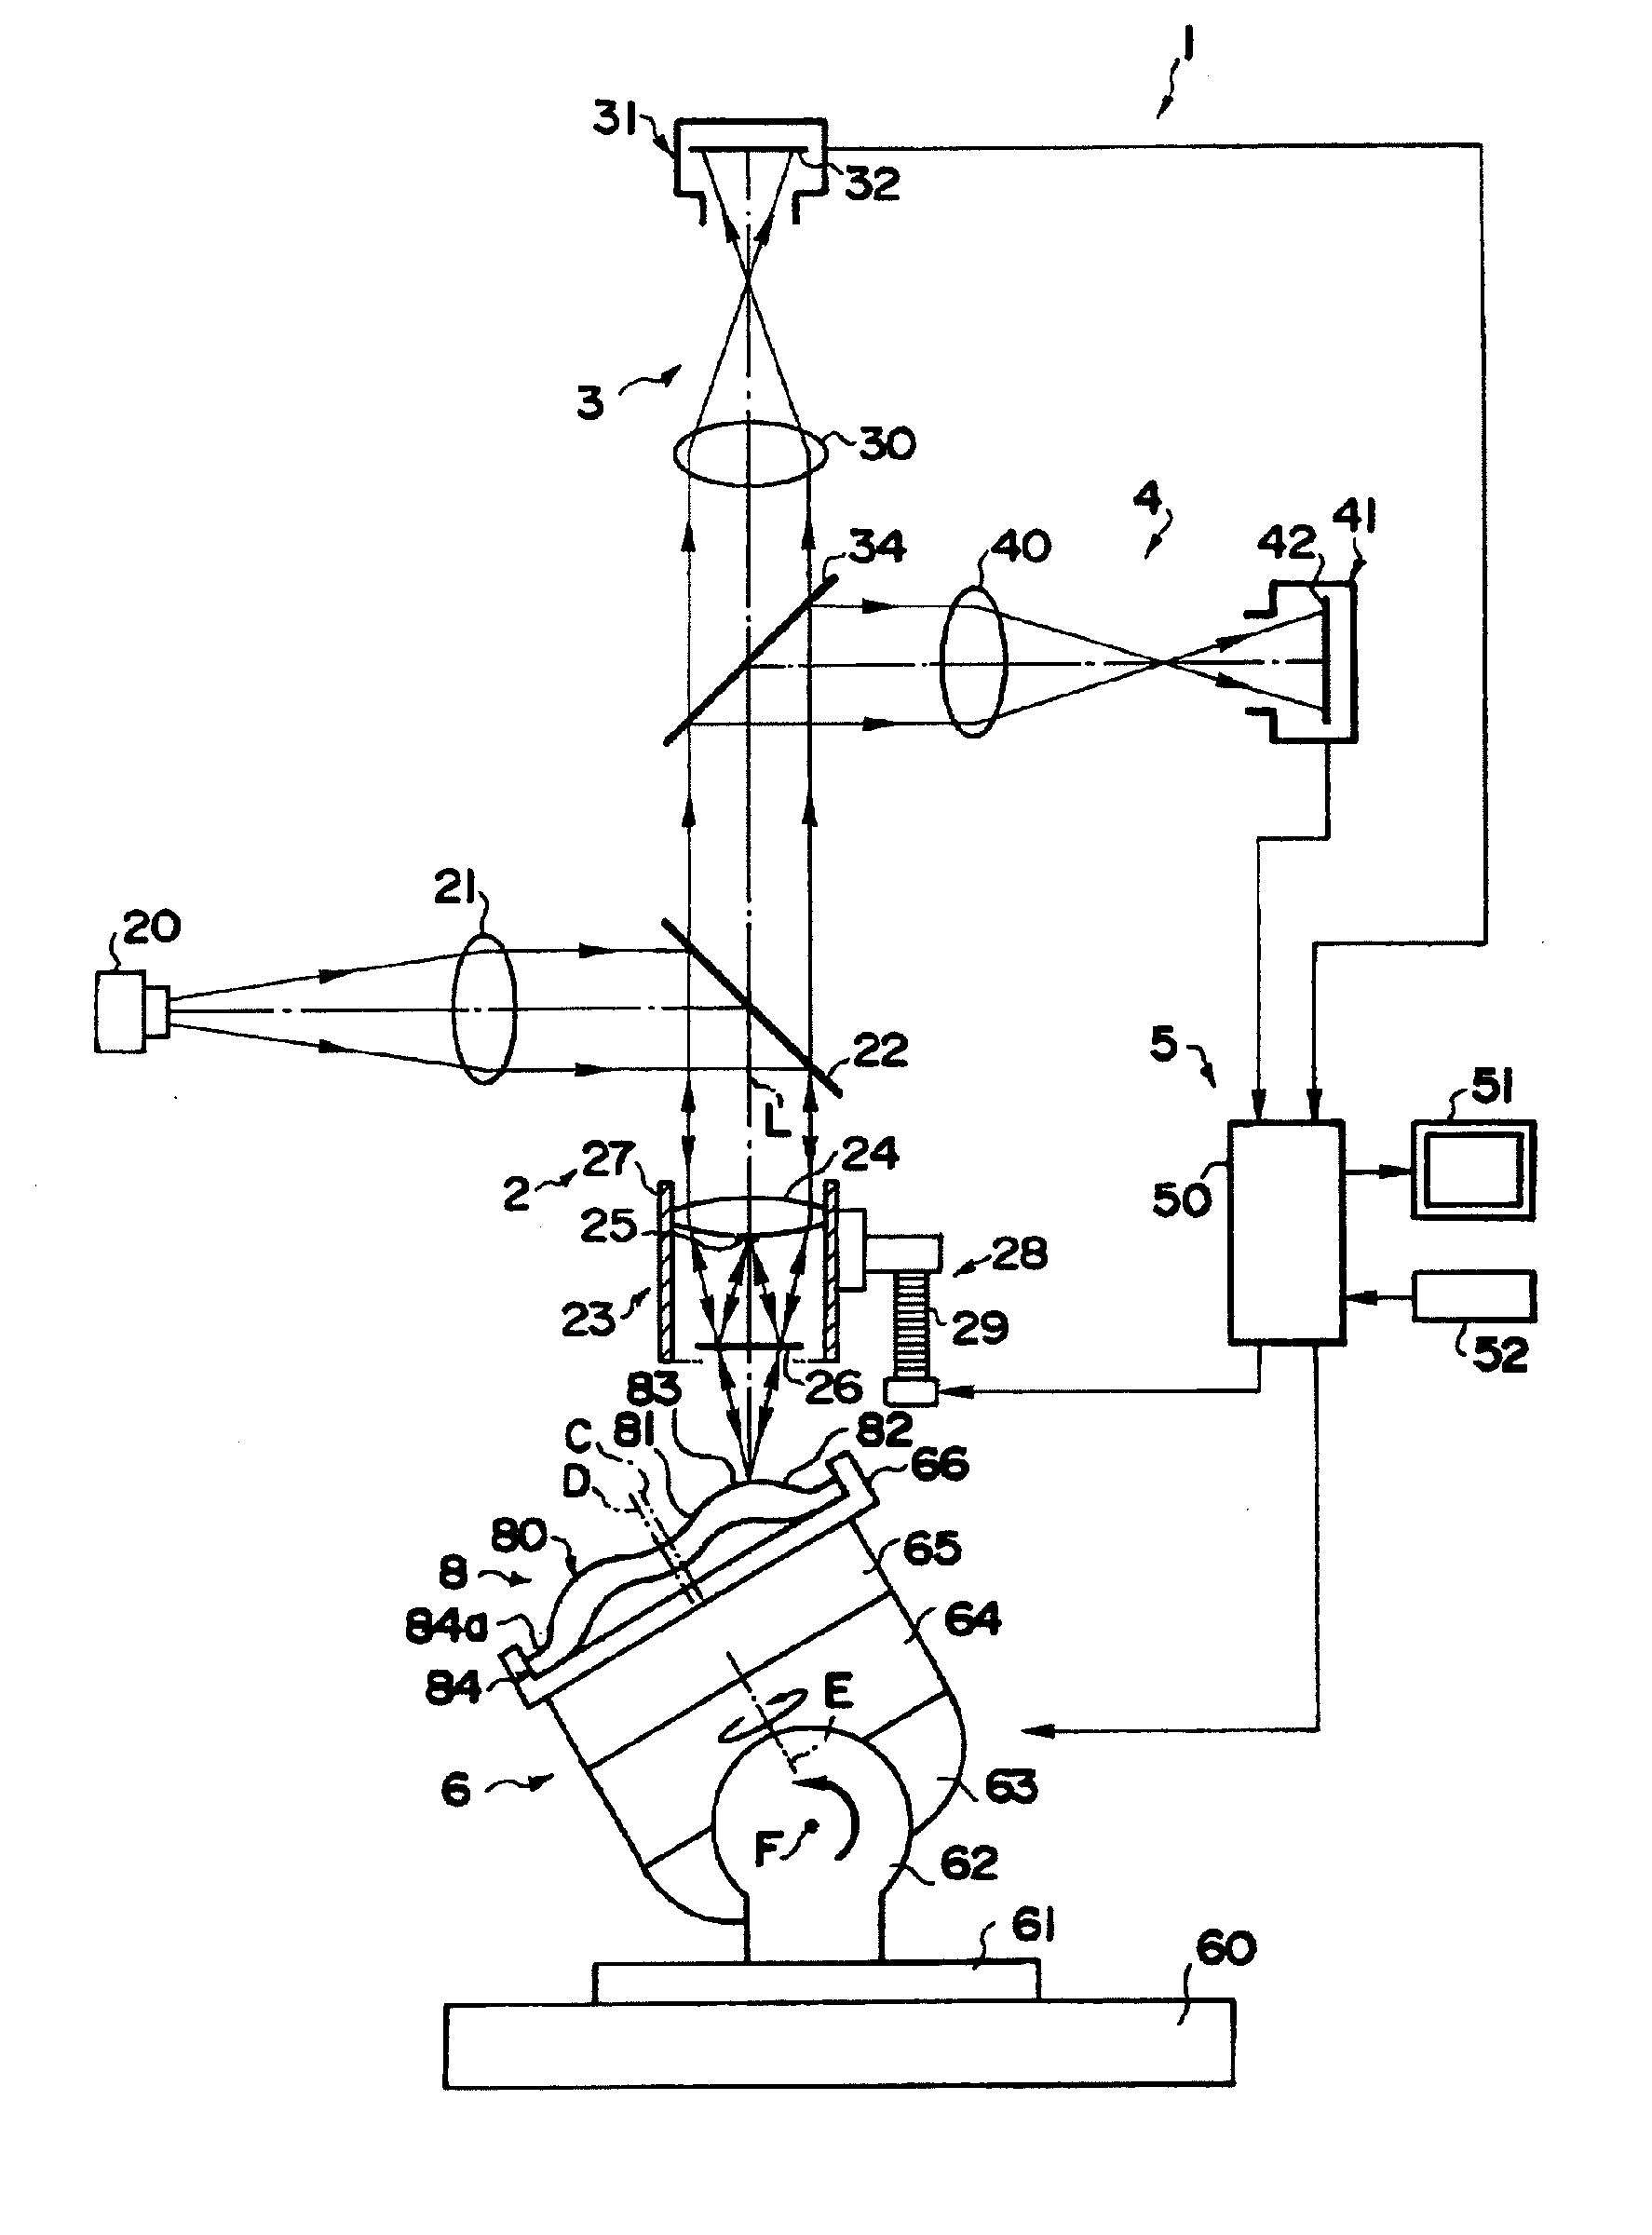 Optical wave interference measuring apparatus